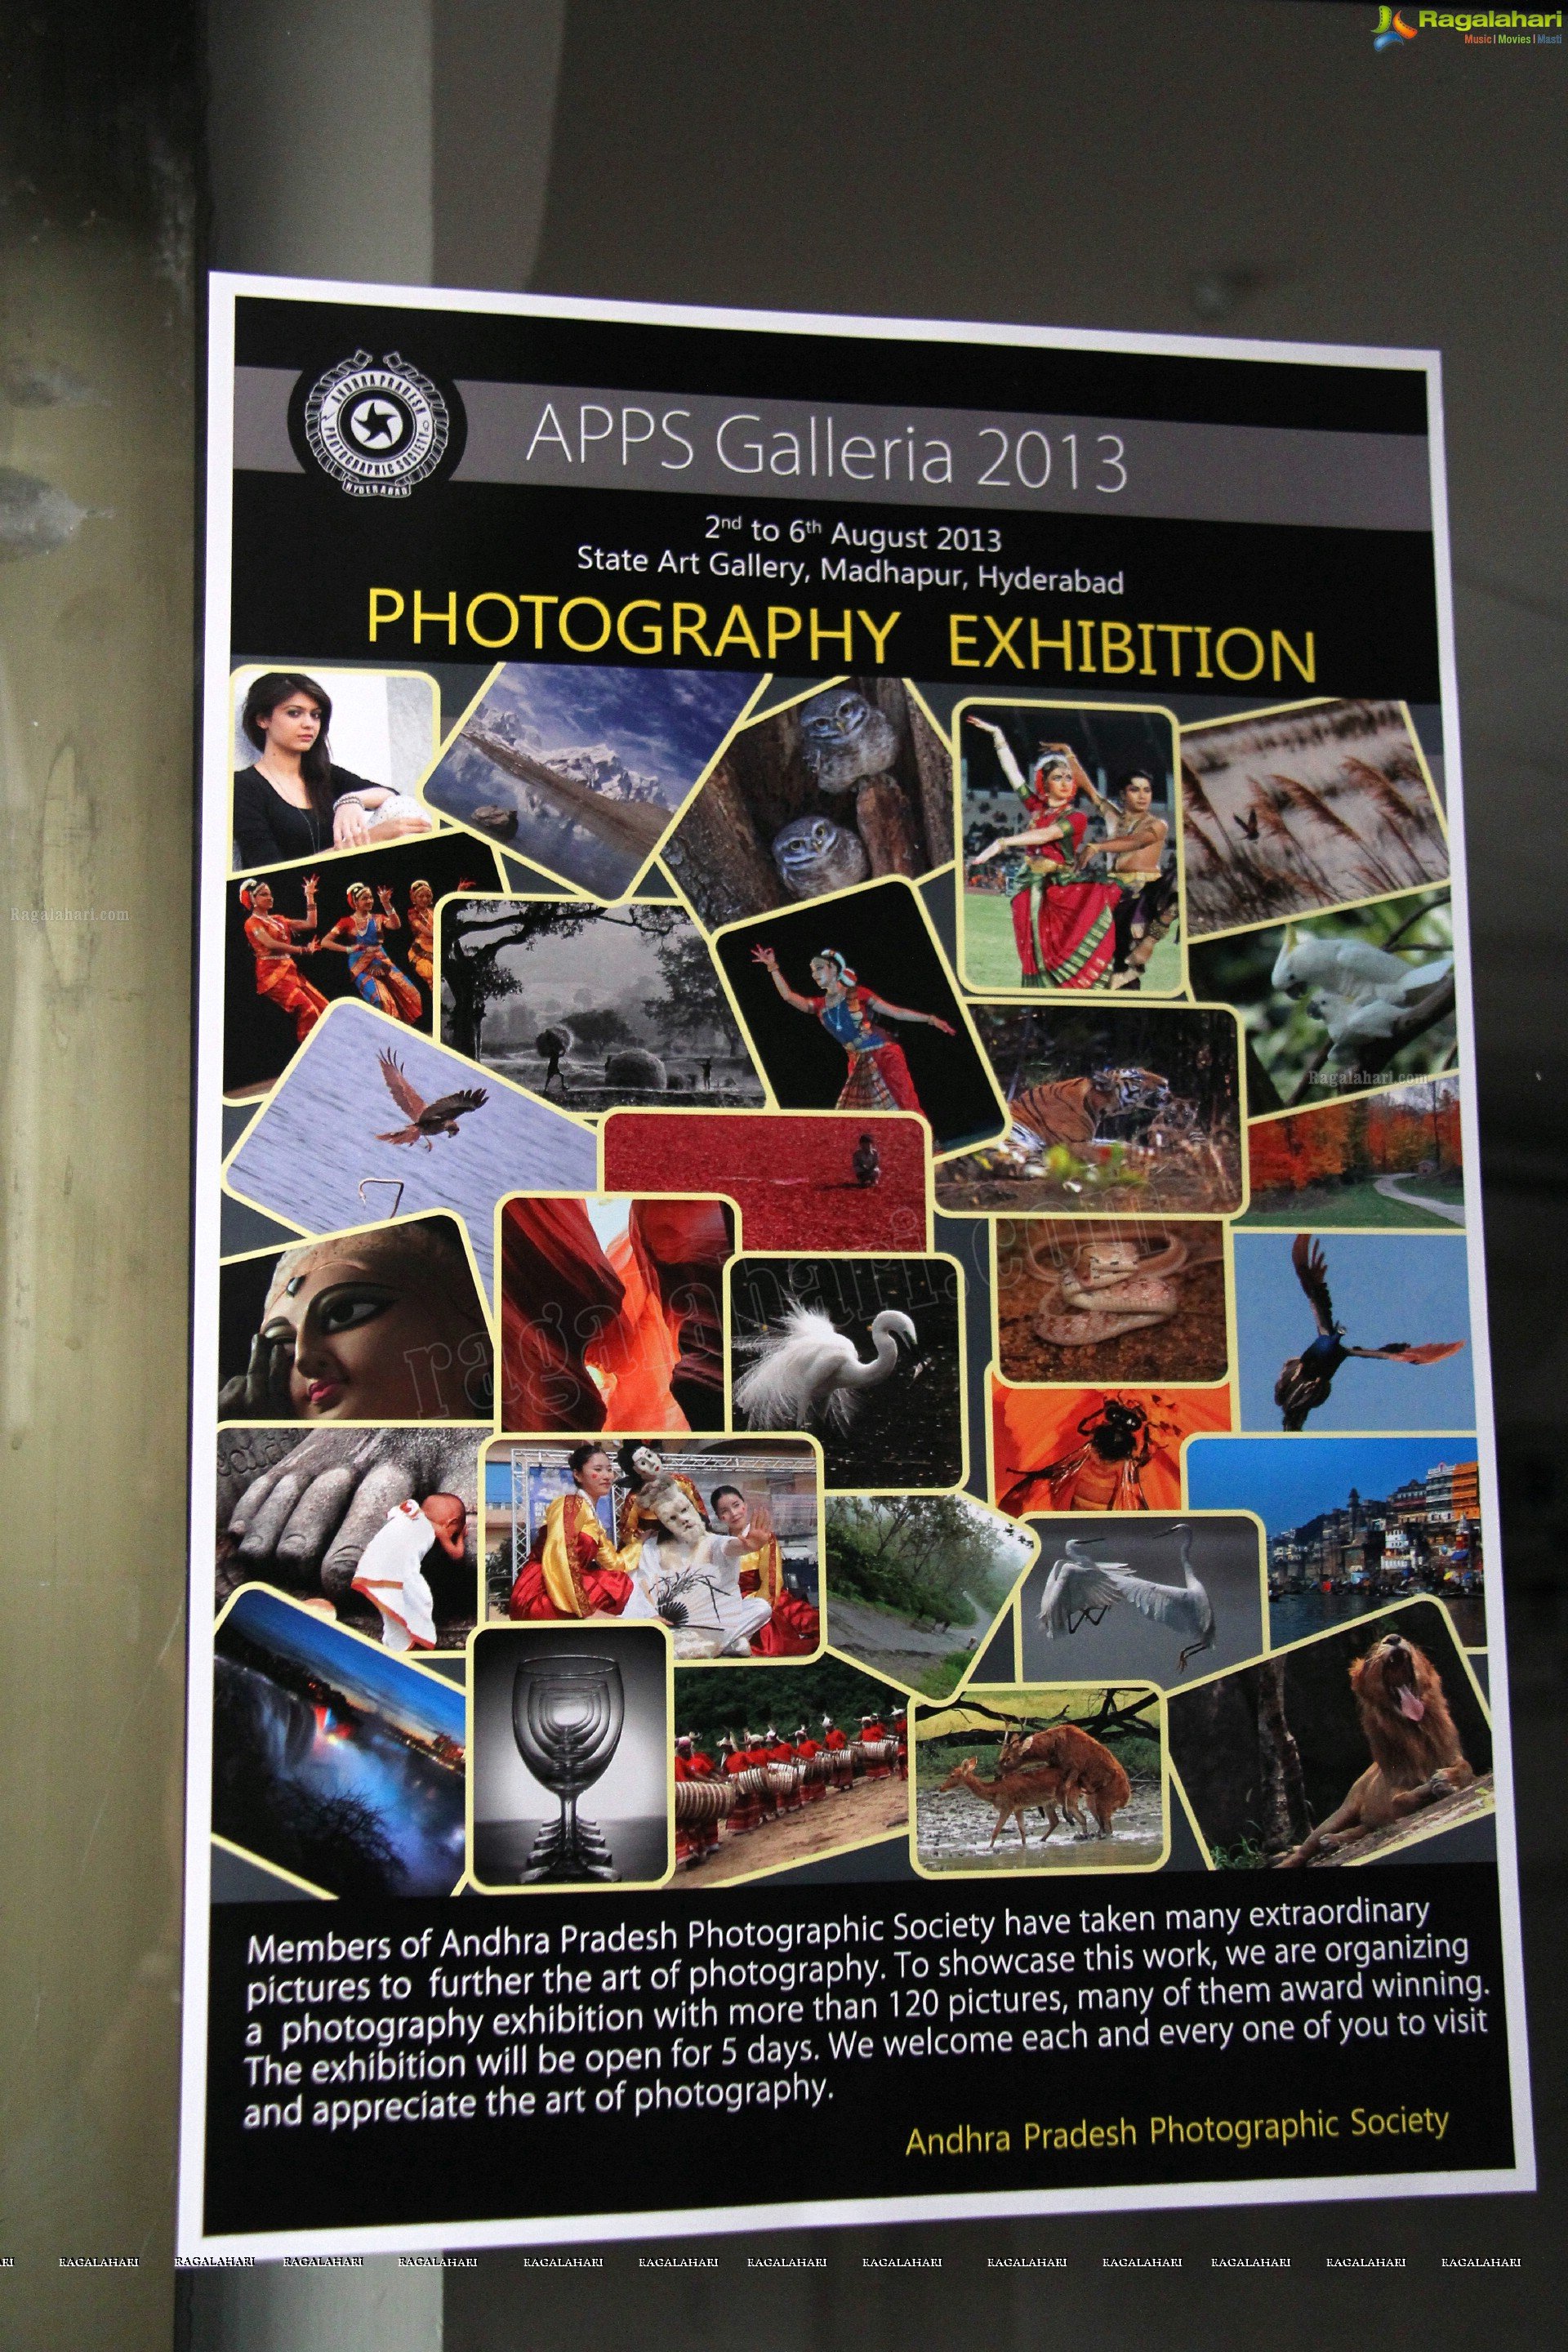 APPS Galleria 2013 Exhibition at Chinmayee State Art Gallery, Hyderabad